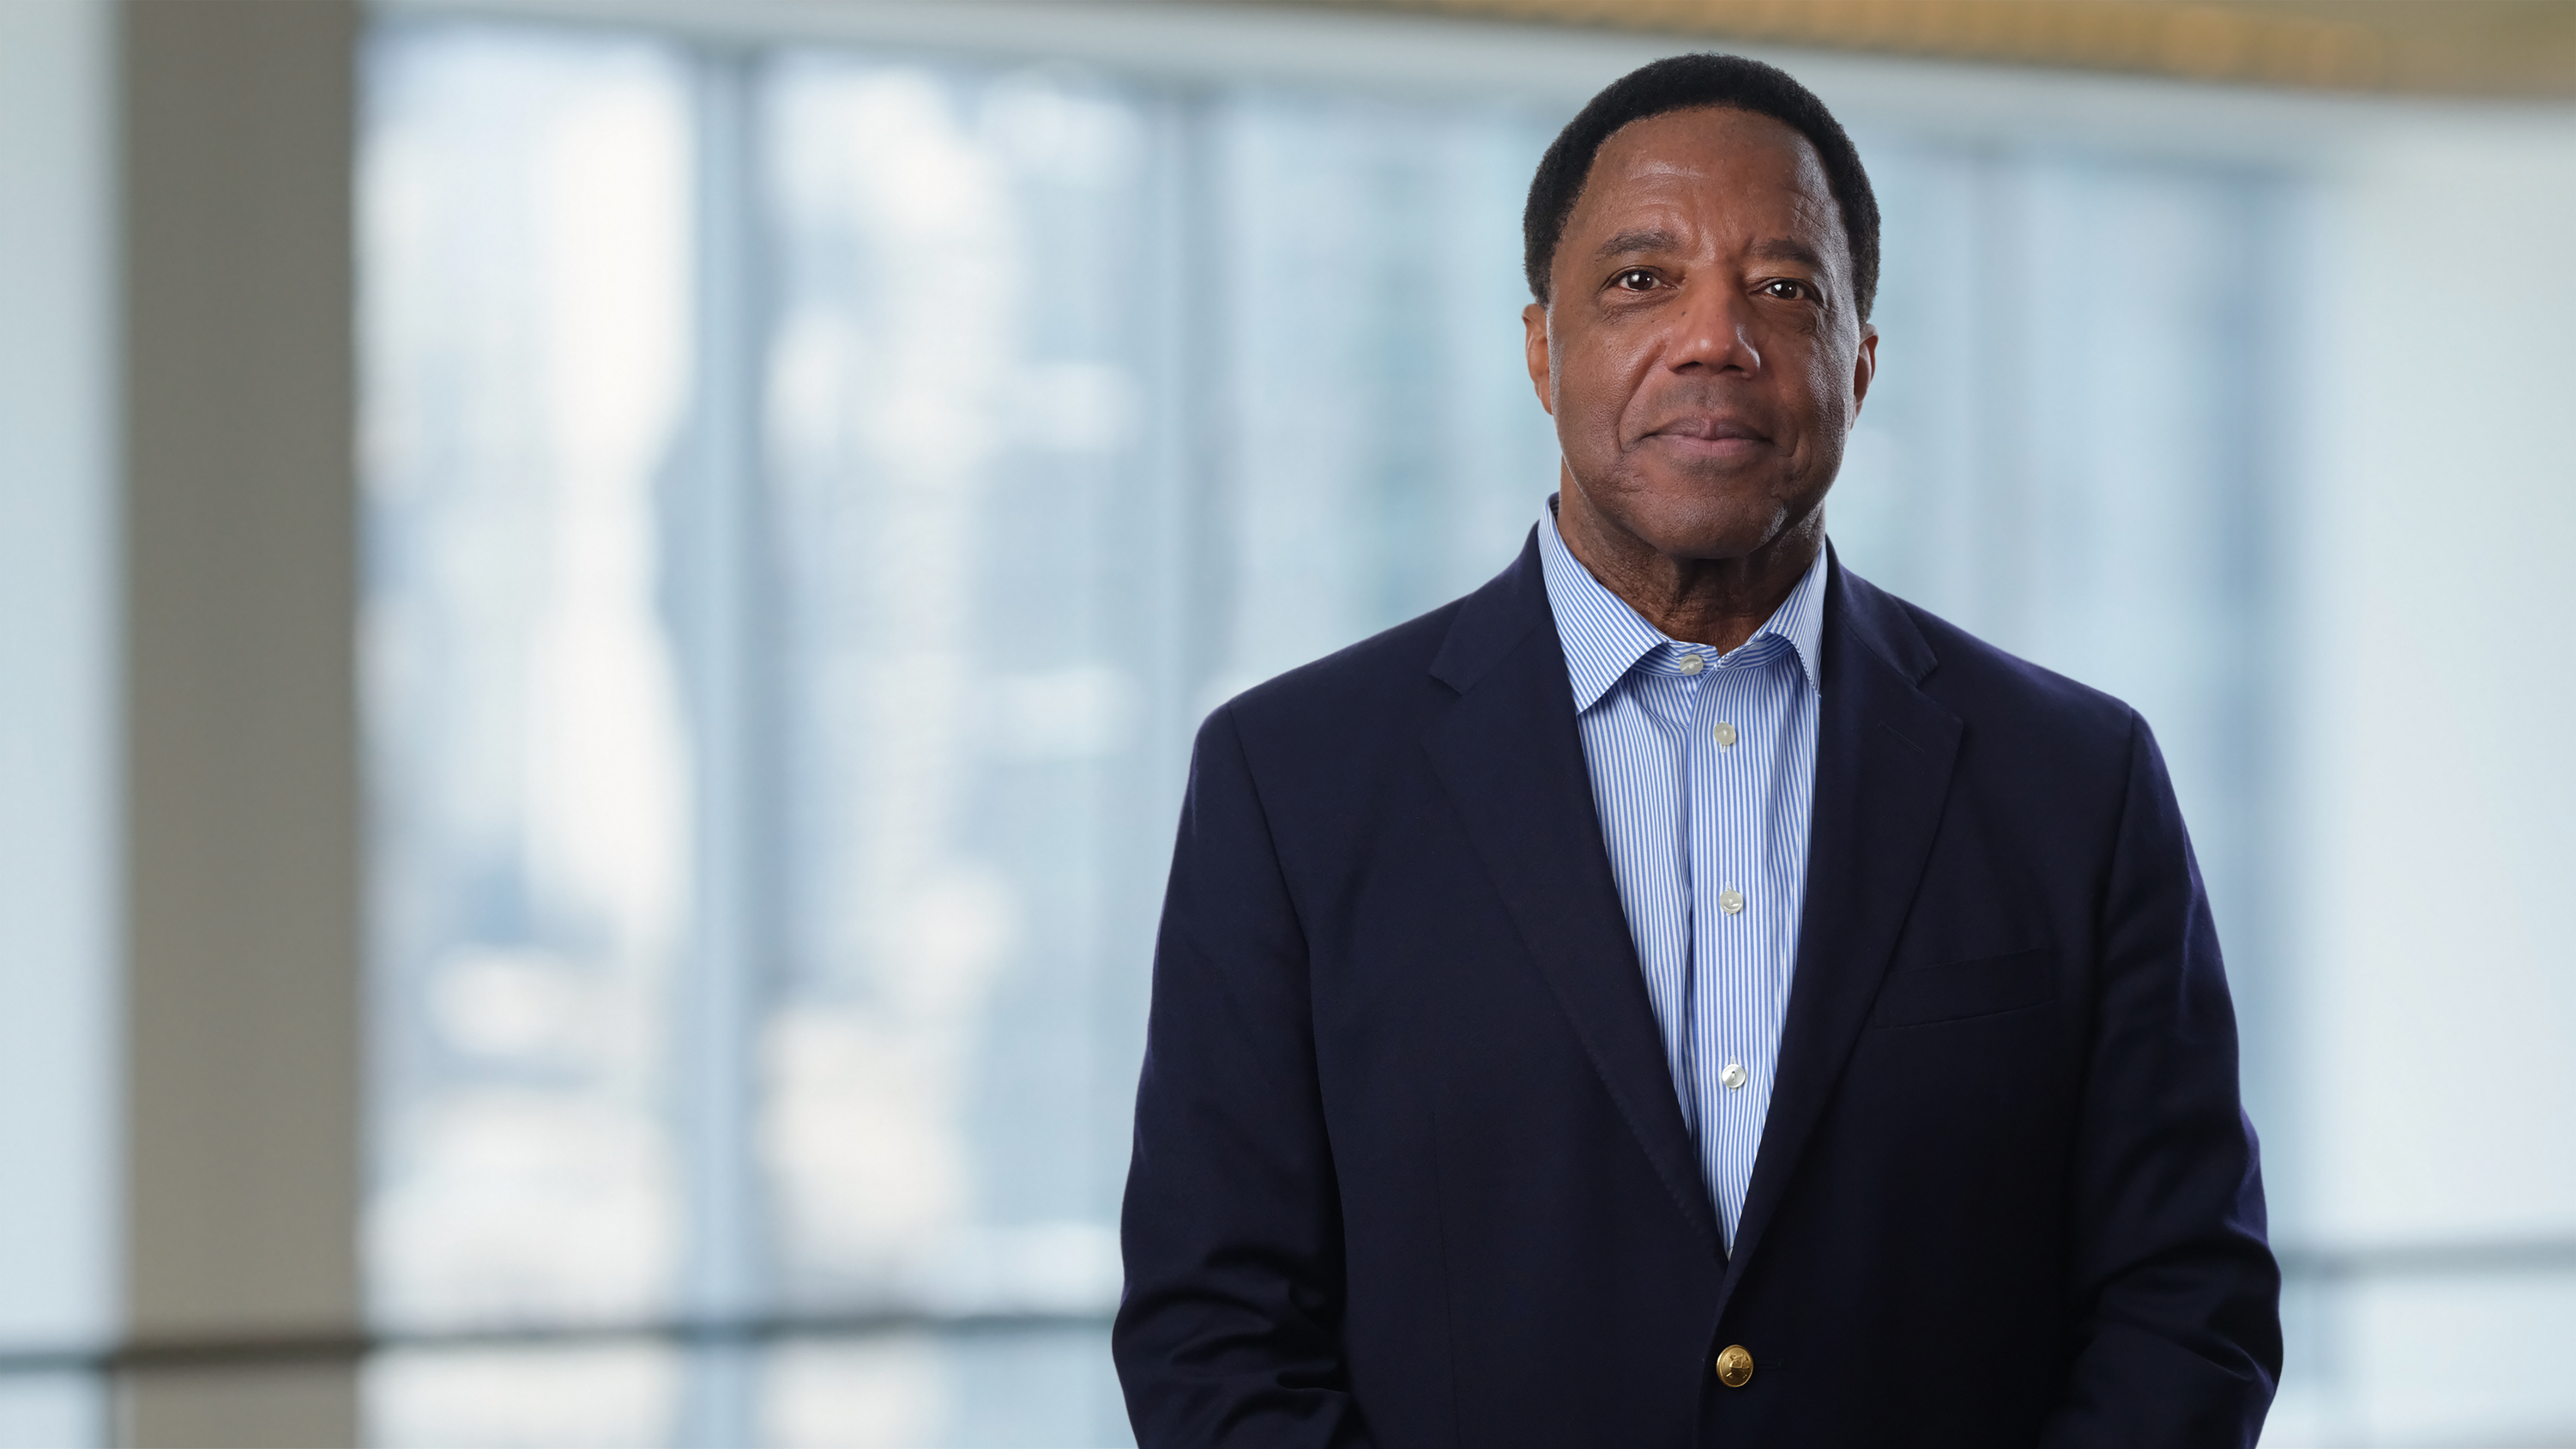 Lloyd Dean was recognized as a champion for health equity, healthcare access, and leadership in increasing the number of culturally competent physicians.